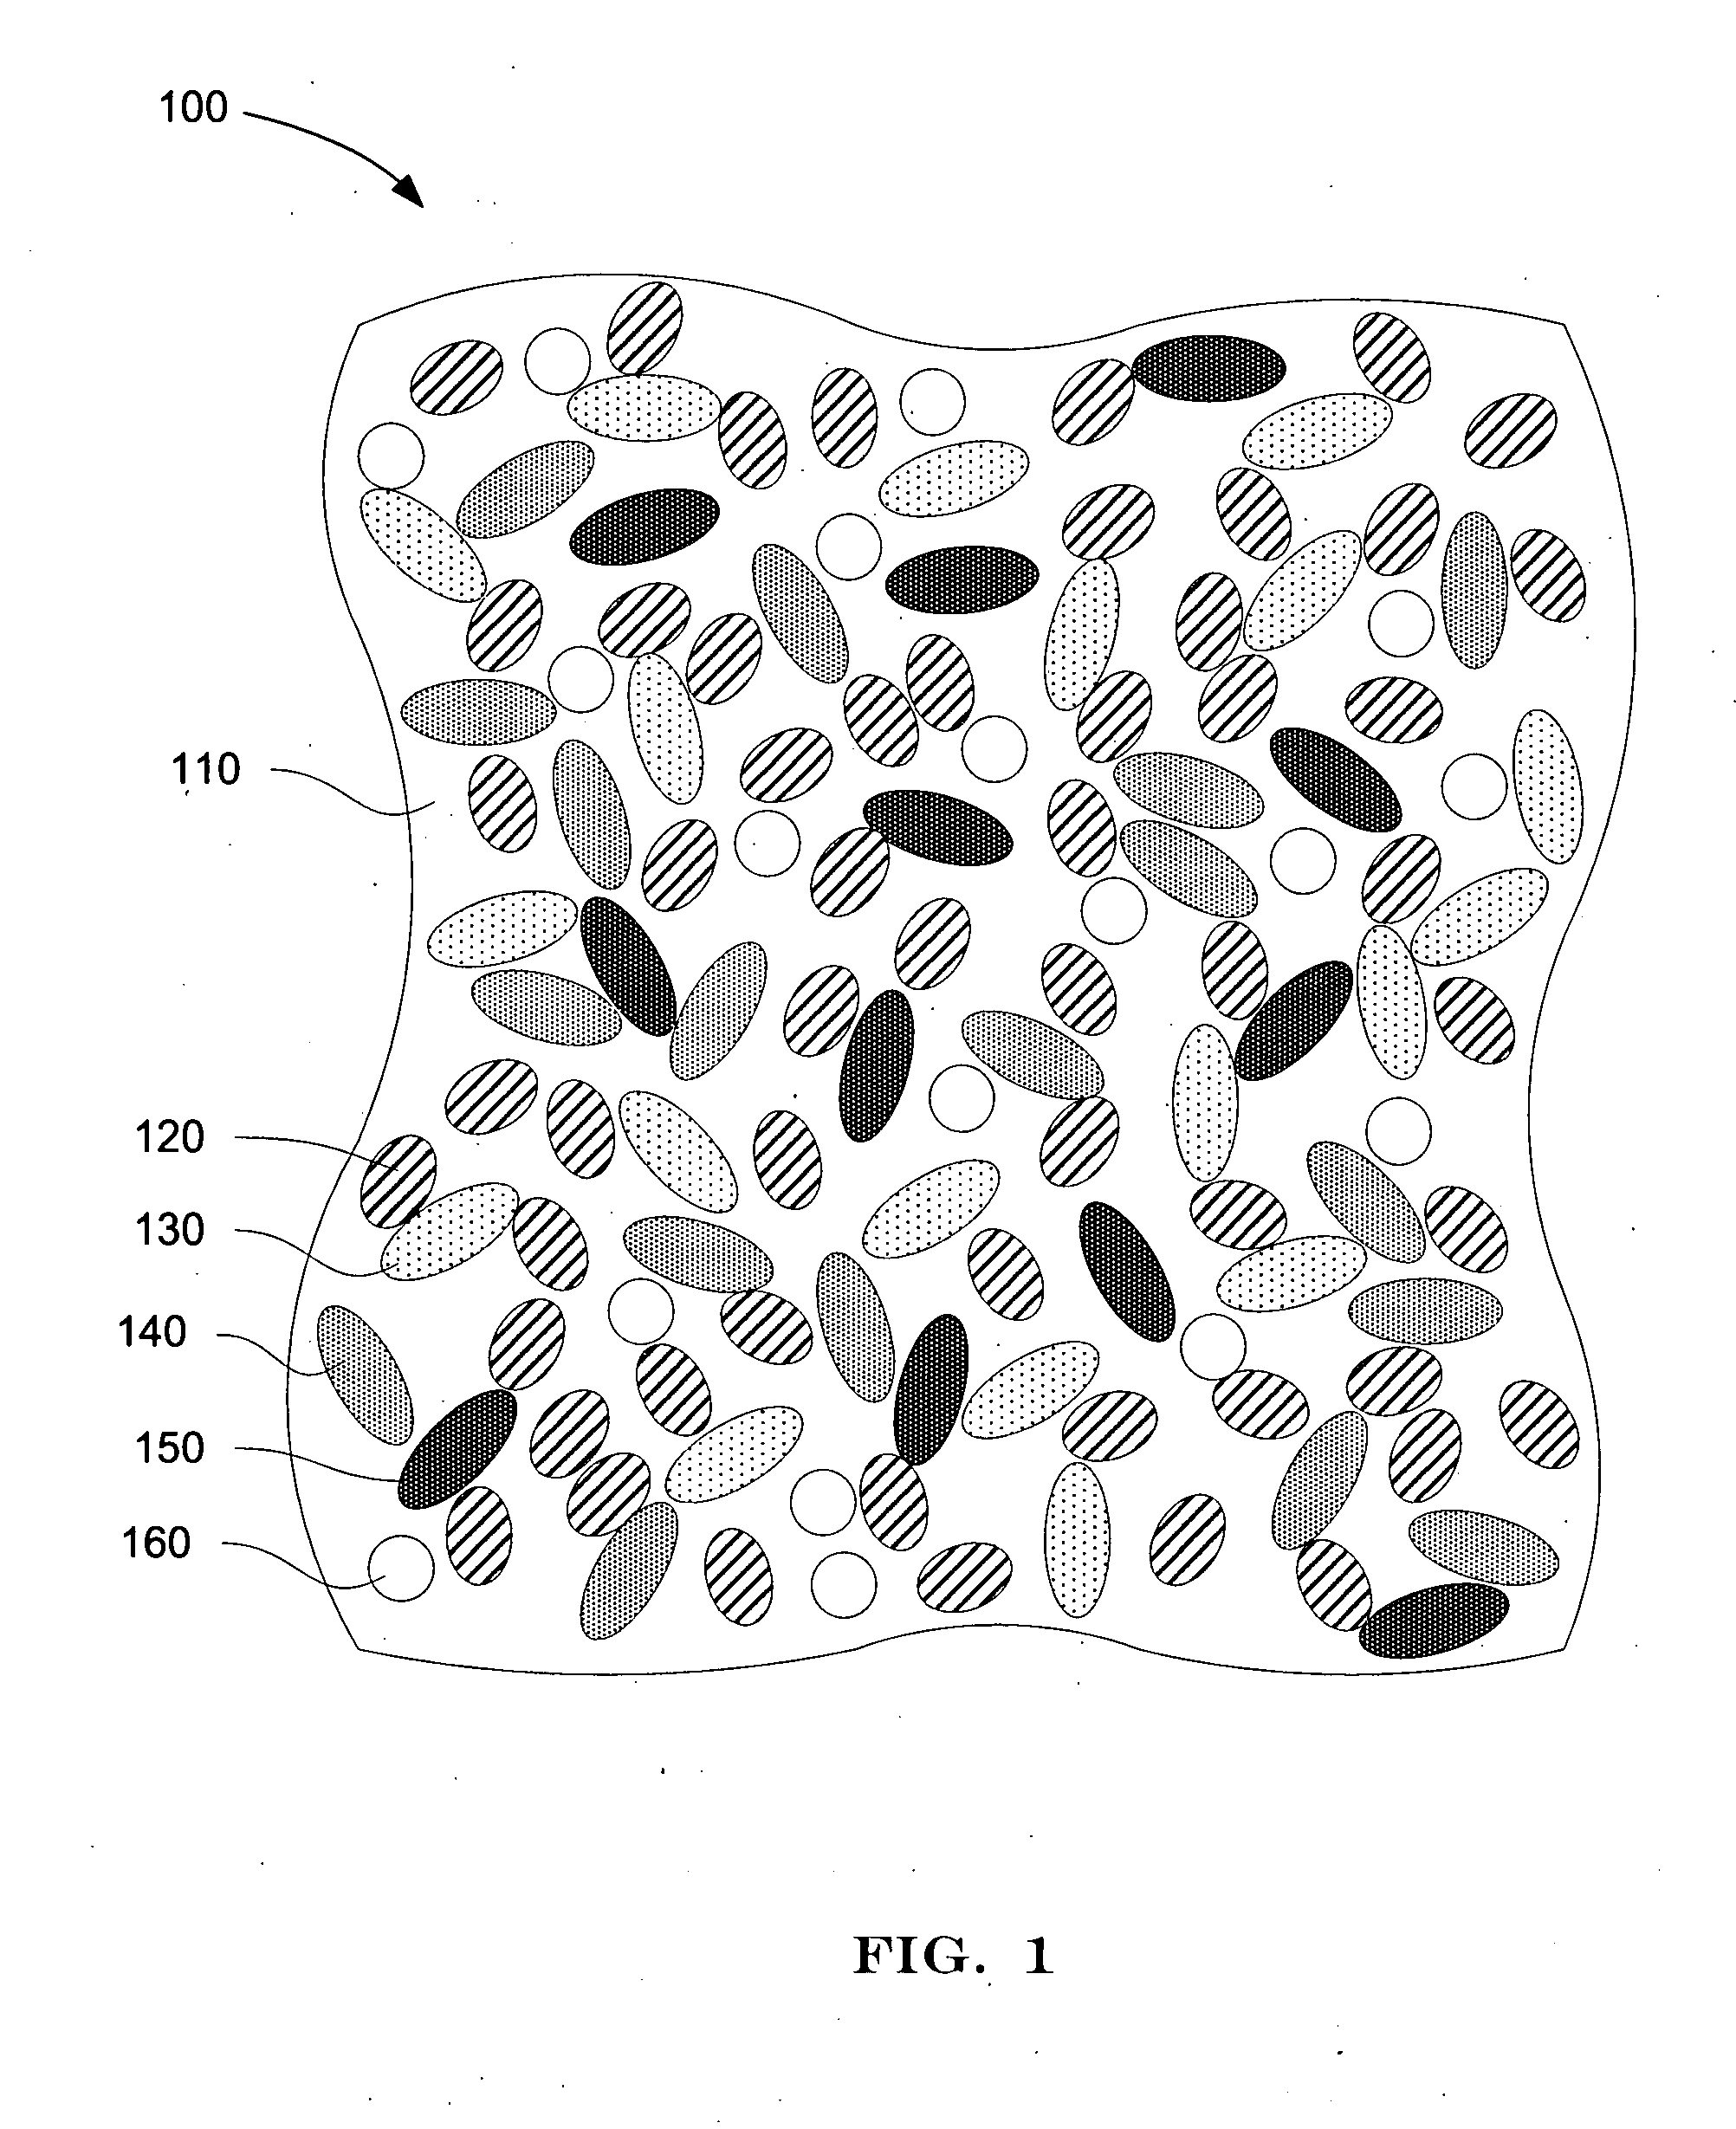 Formulations for voltage switchable dielectric material having a stepped voltage response and methods for making the same